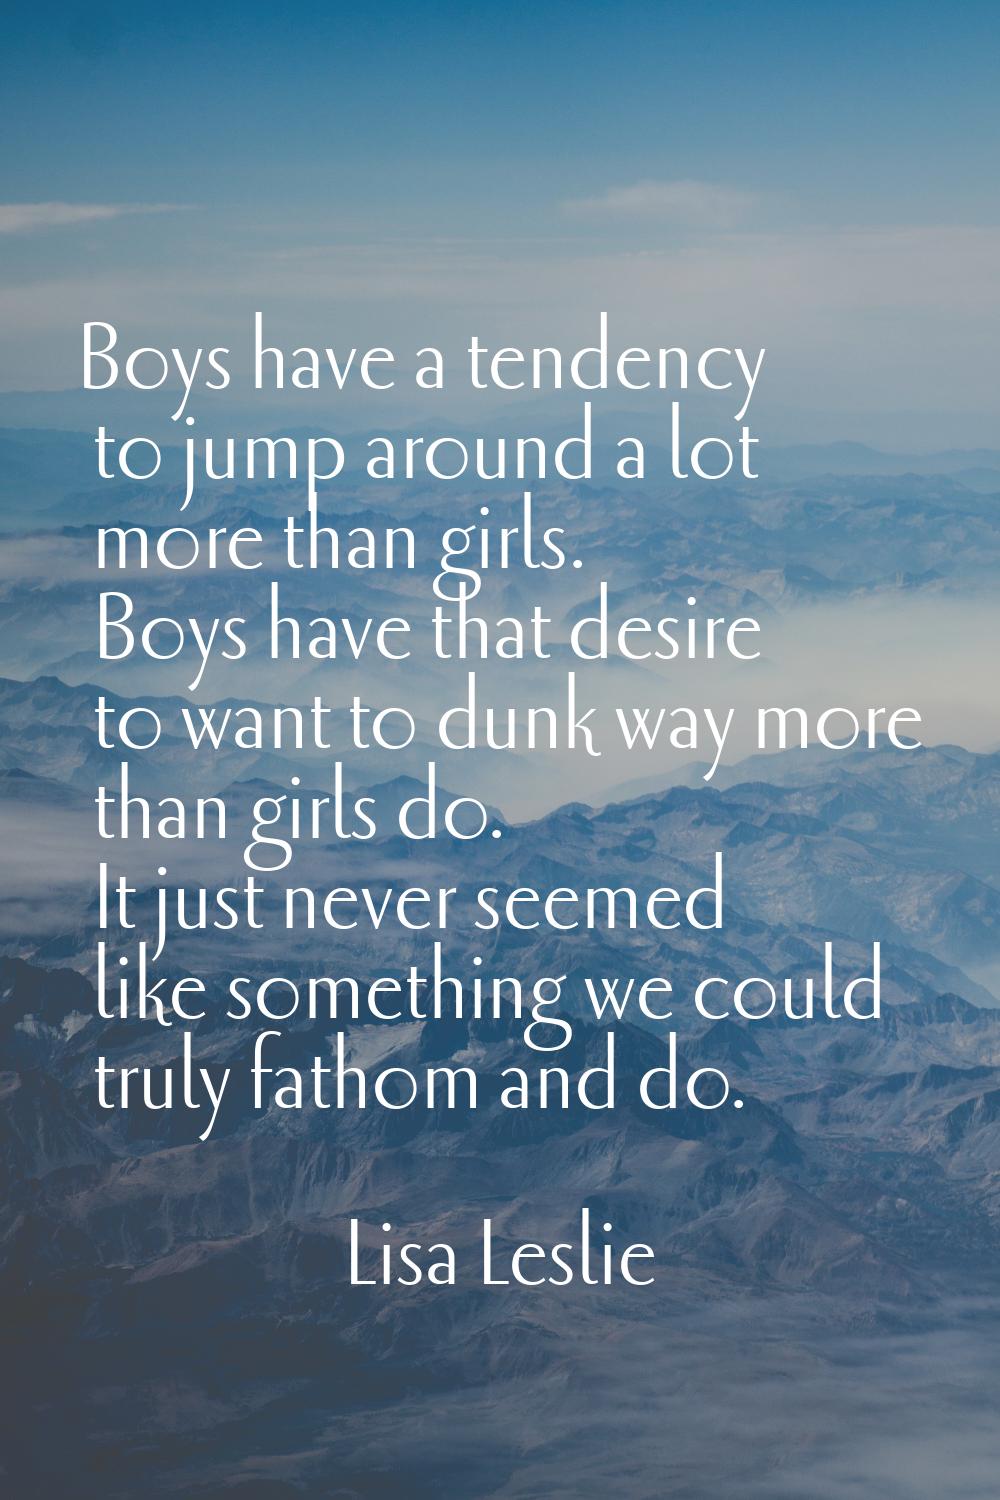 Boys have a tendency to jump around a lot more than girls. Boys have that desire to want to dunk wa